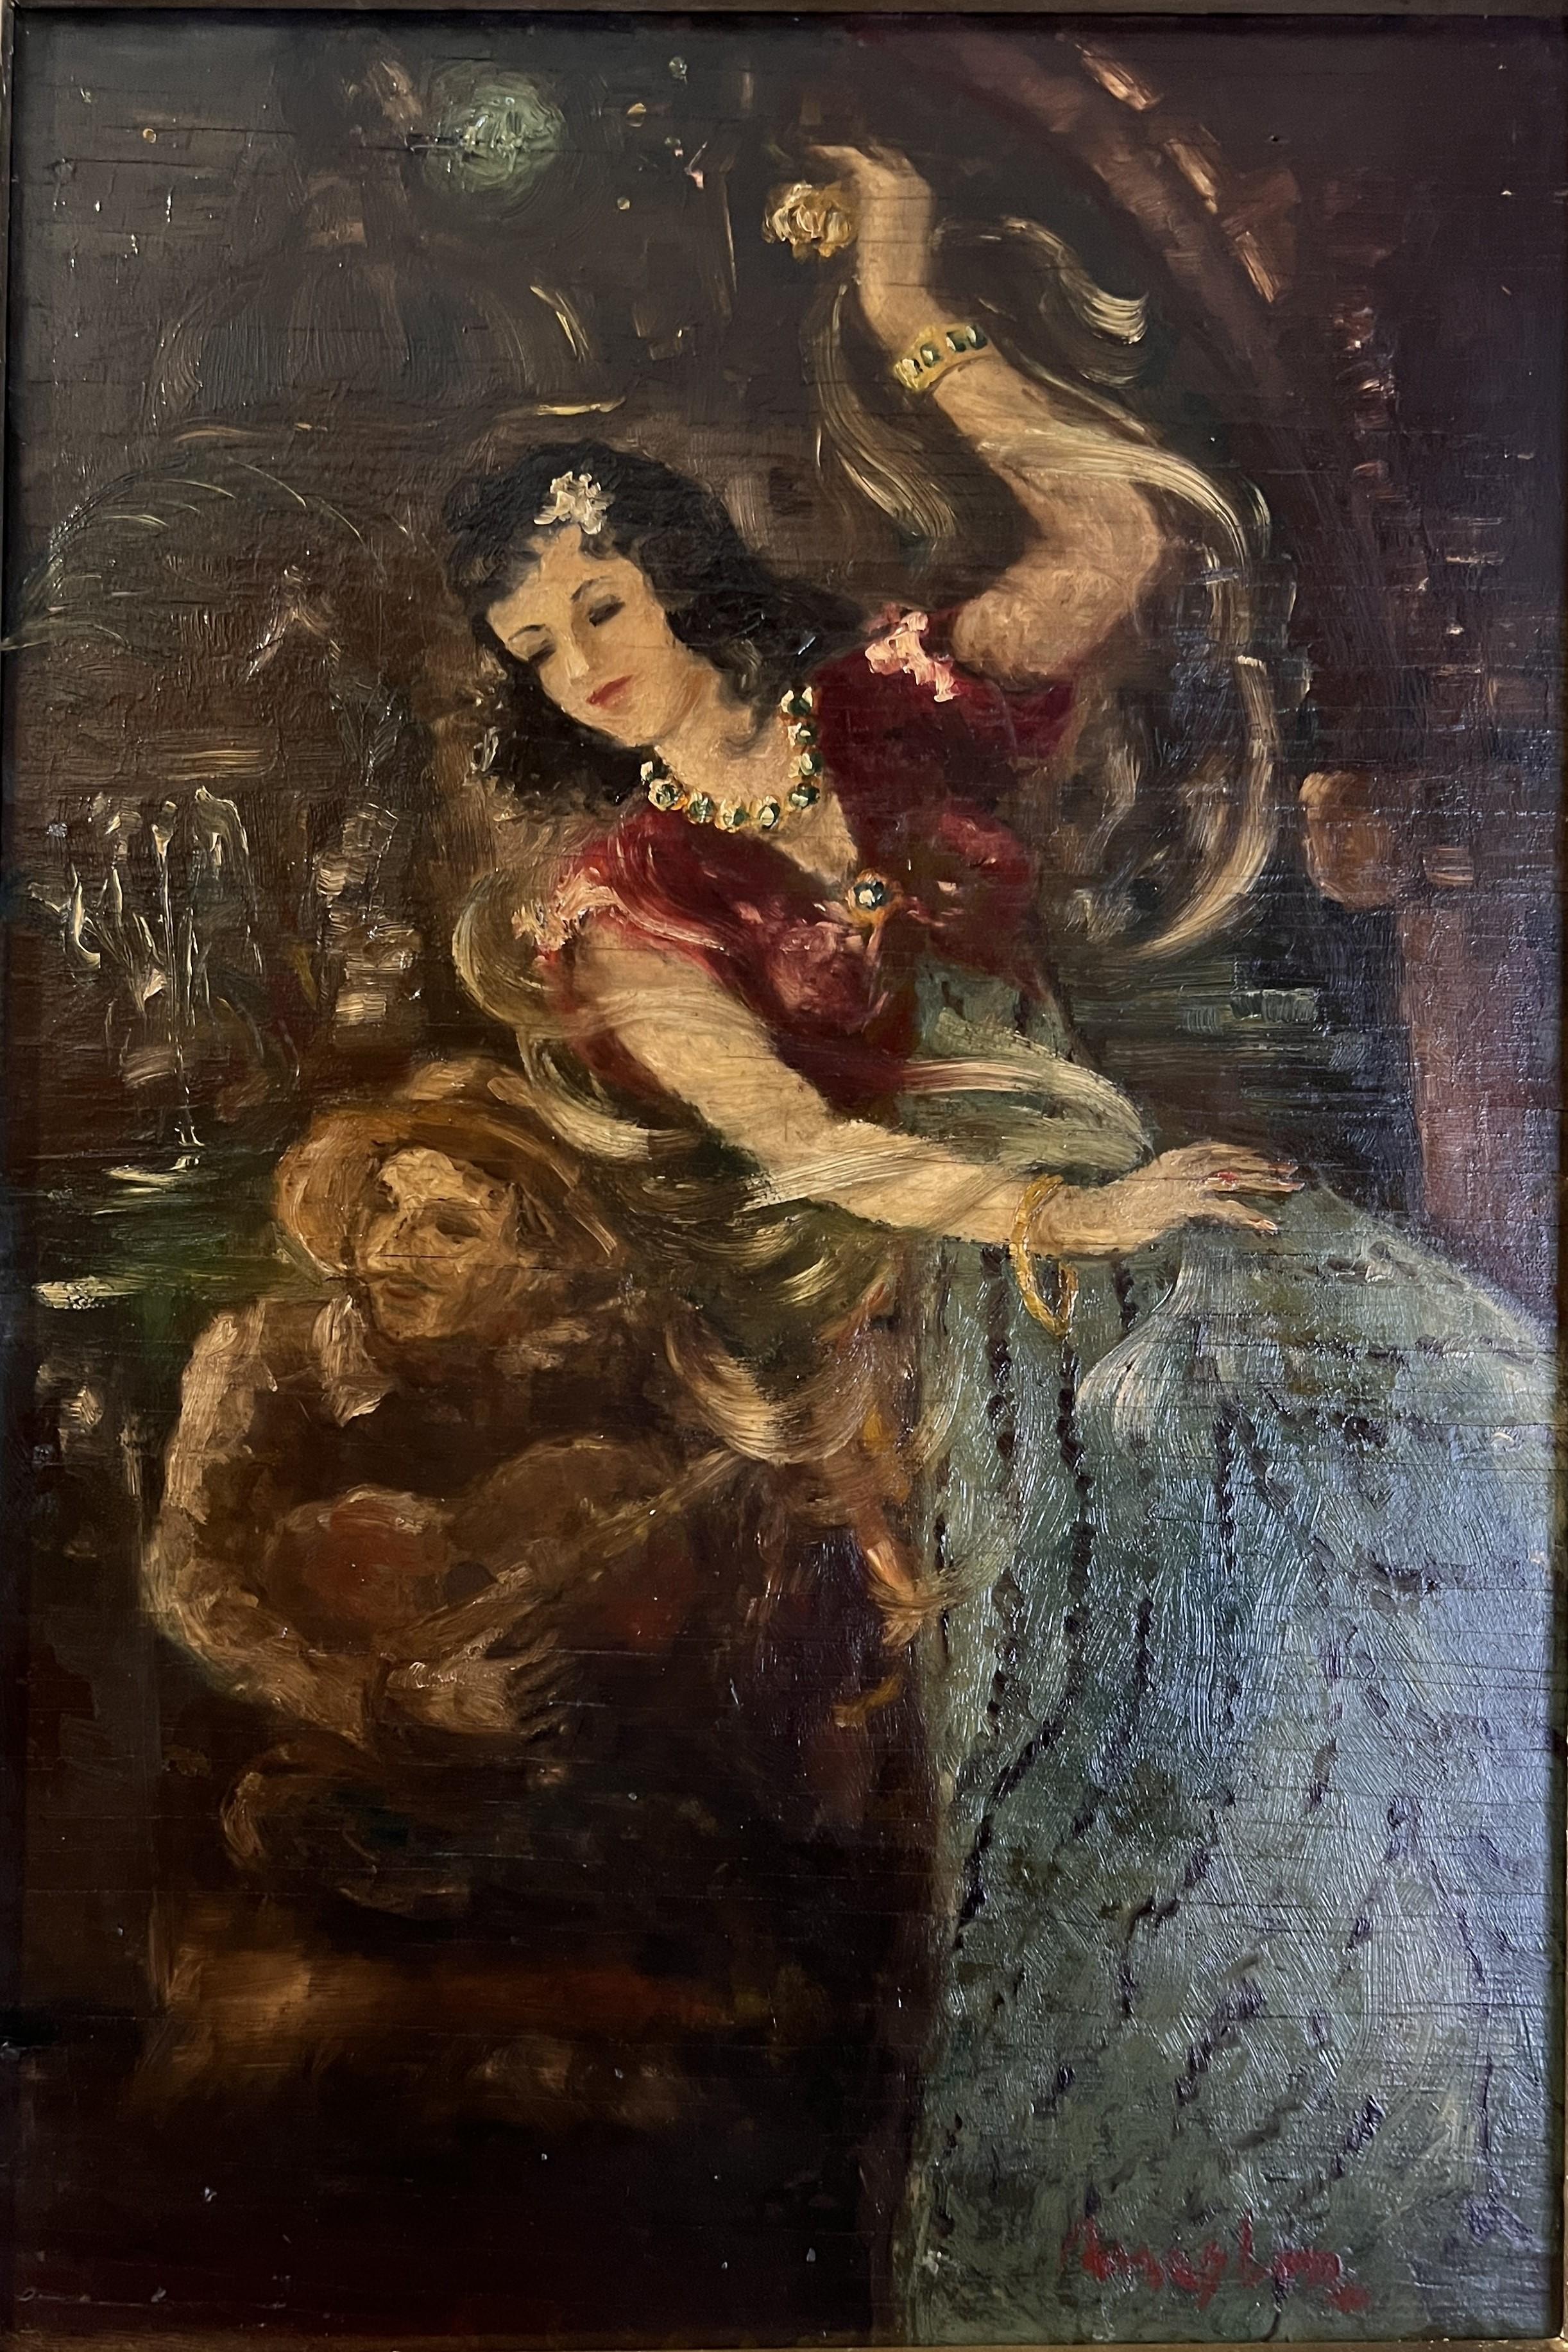 Up for sale is an original approximately 19th century  oil painting on wood, depicting a dancing Spanish woman and a musician. Very impressive.

Dimensions (frame): 25.5”  x 18.5” 
Dimensions (sight): 22 1/2”  x 15.5” 

Signed illegibly in the lower